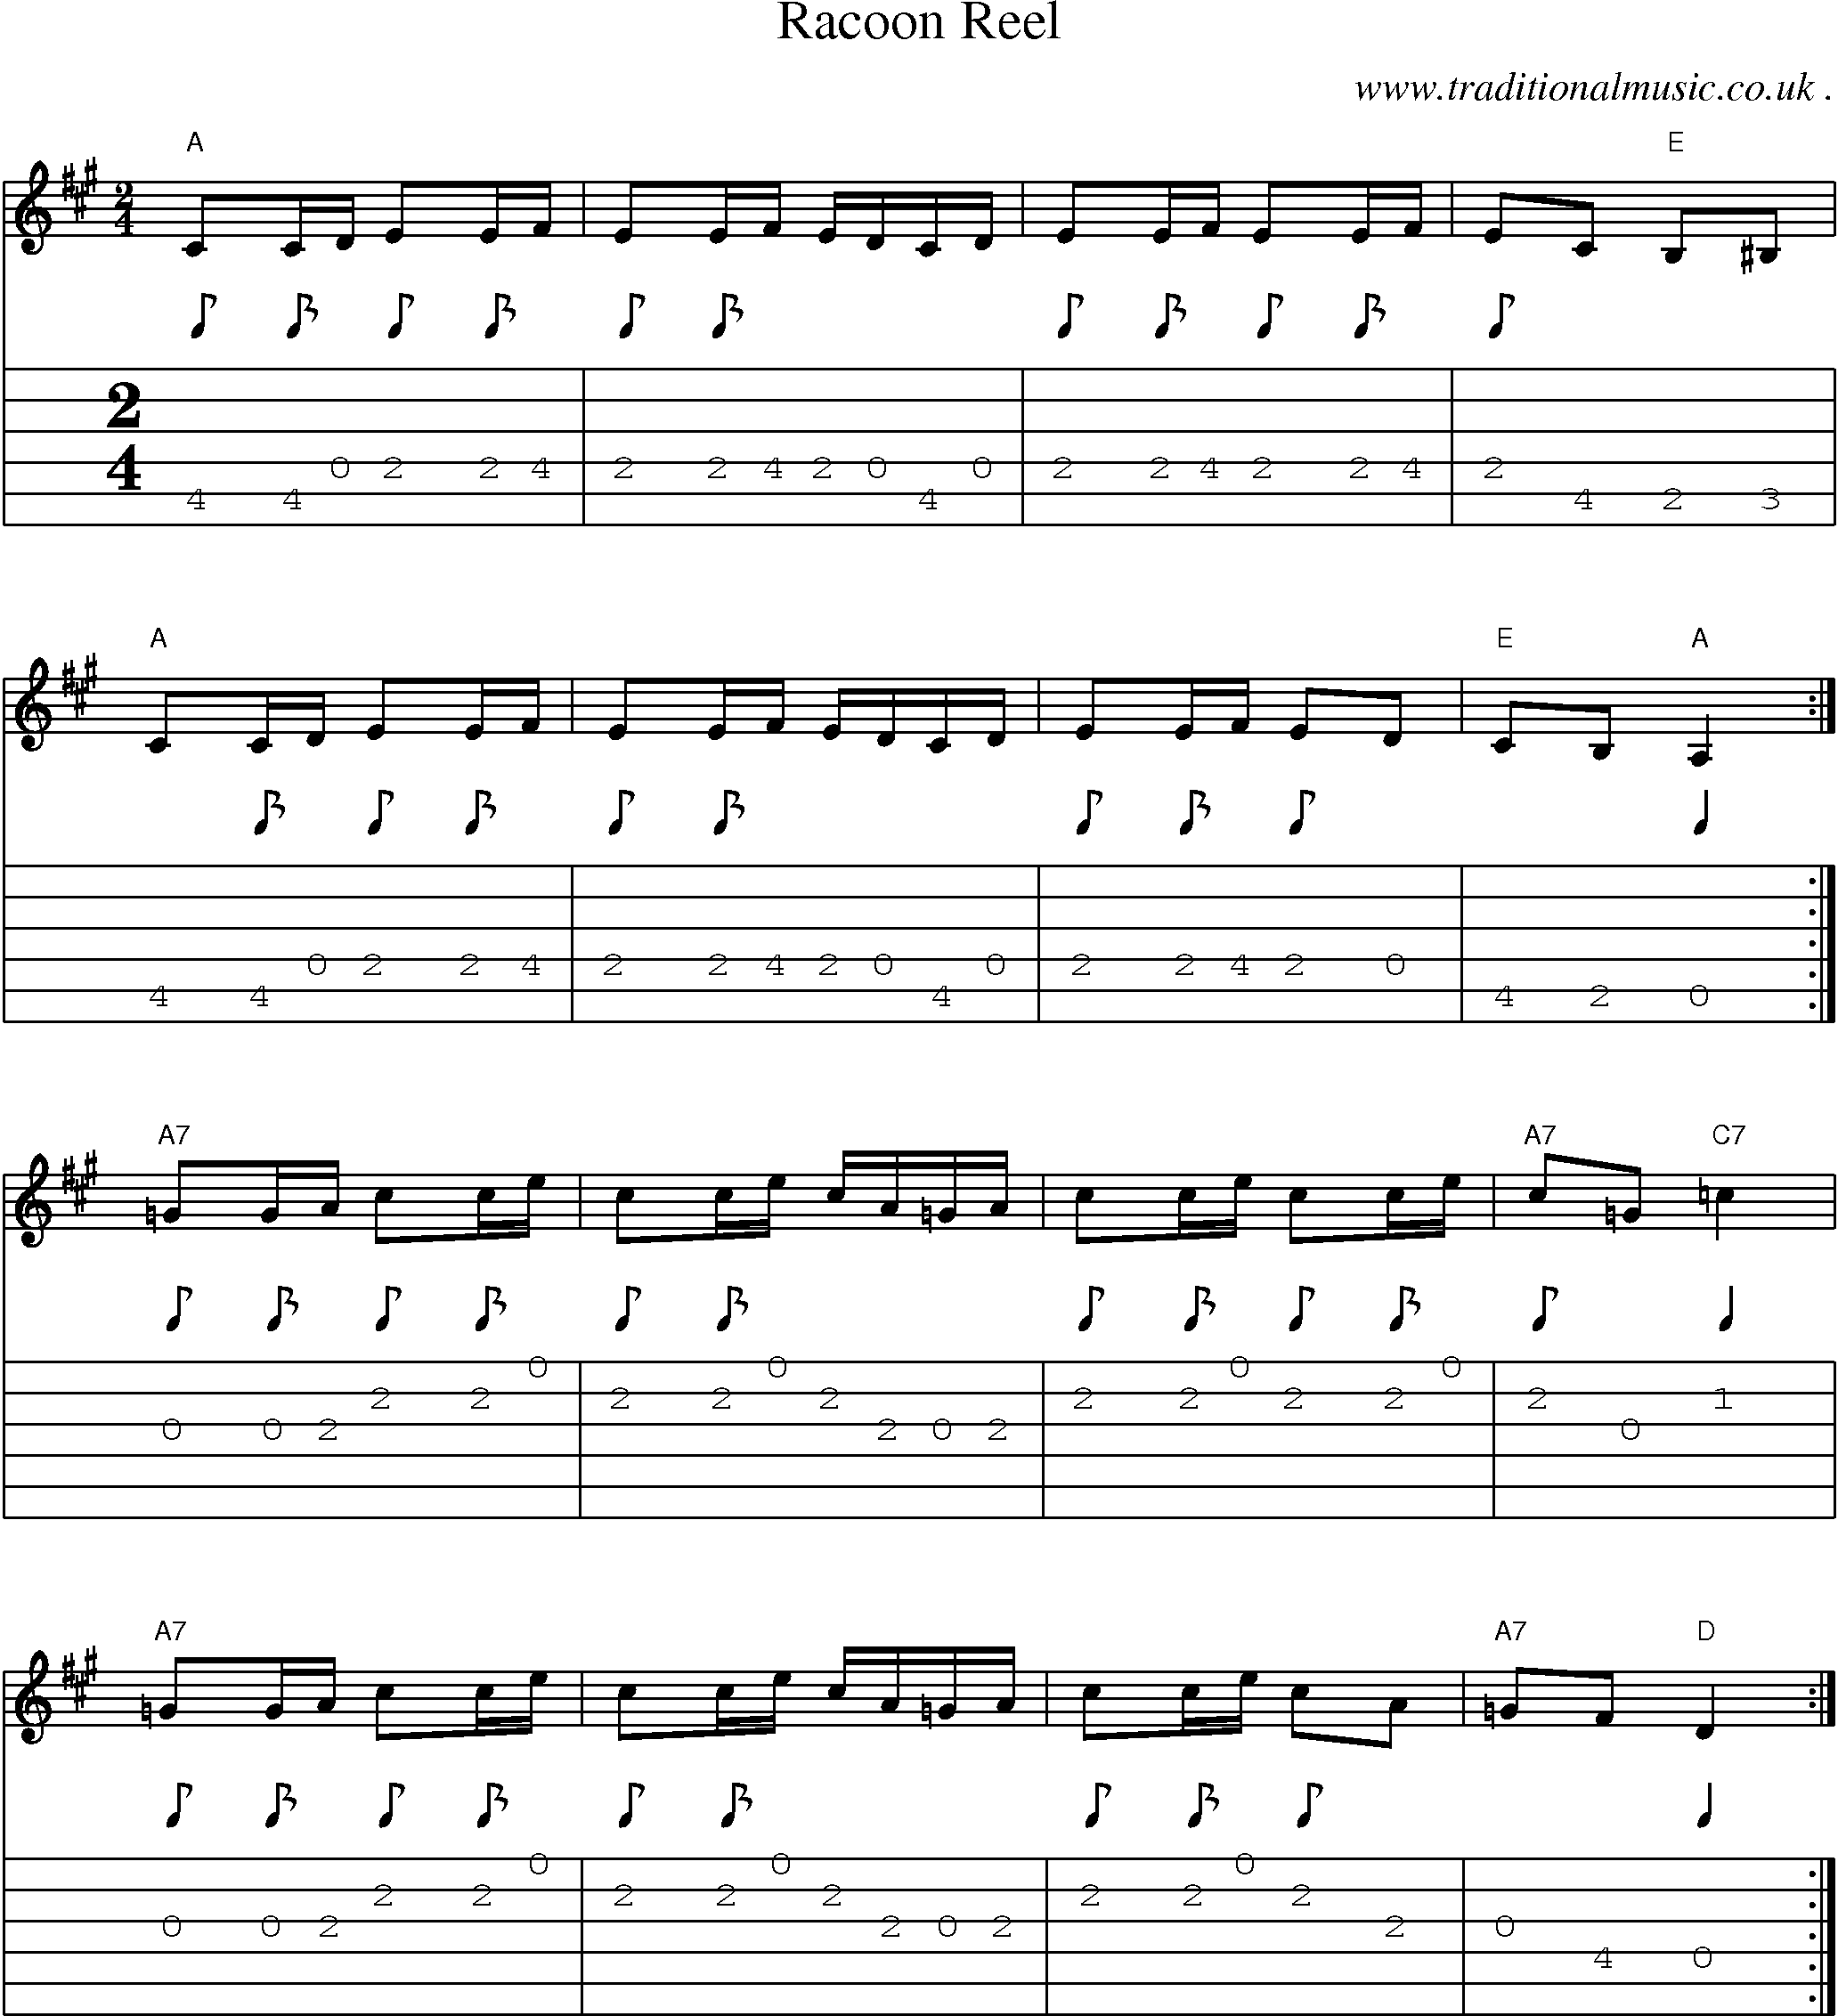 Music Score and Guitar Tabs for Racoon Reel